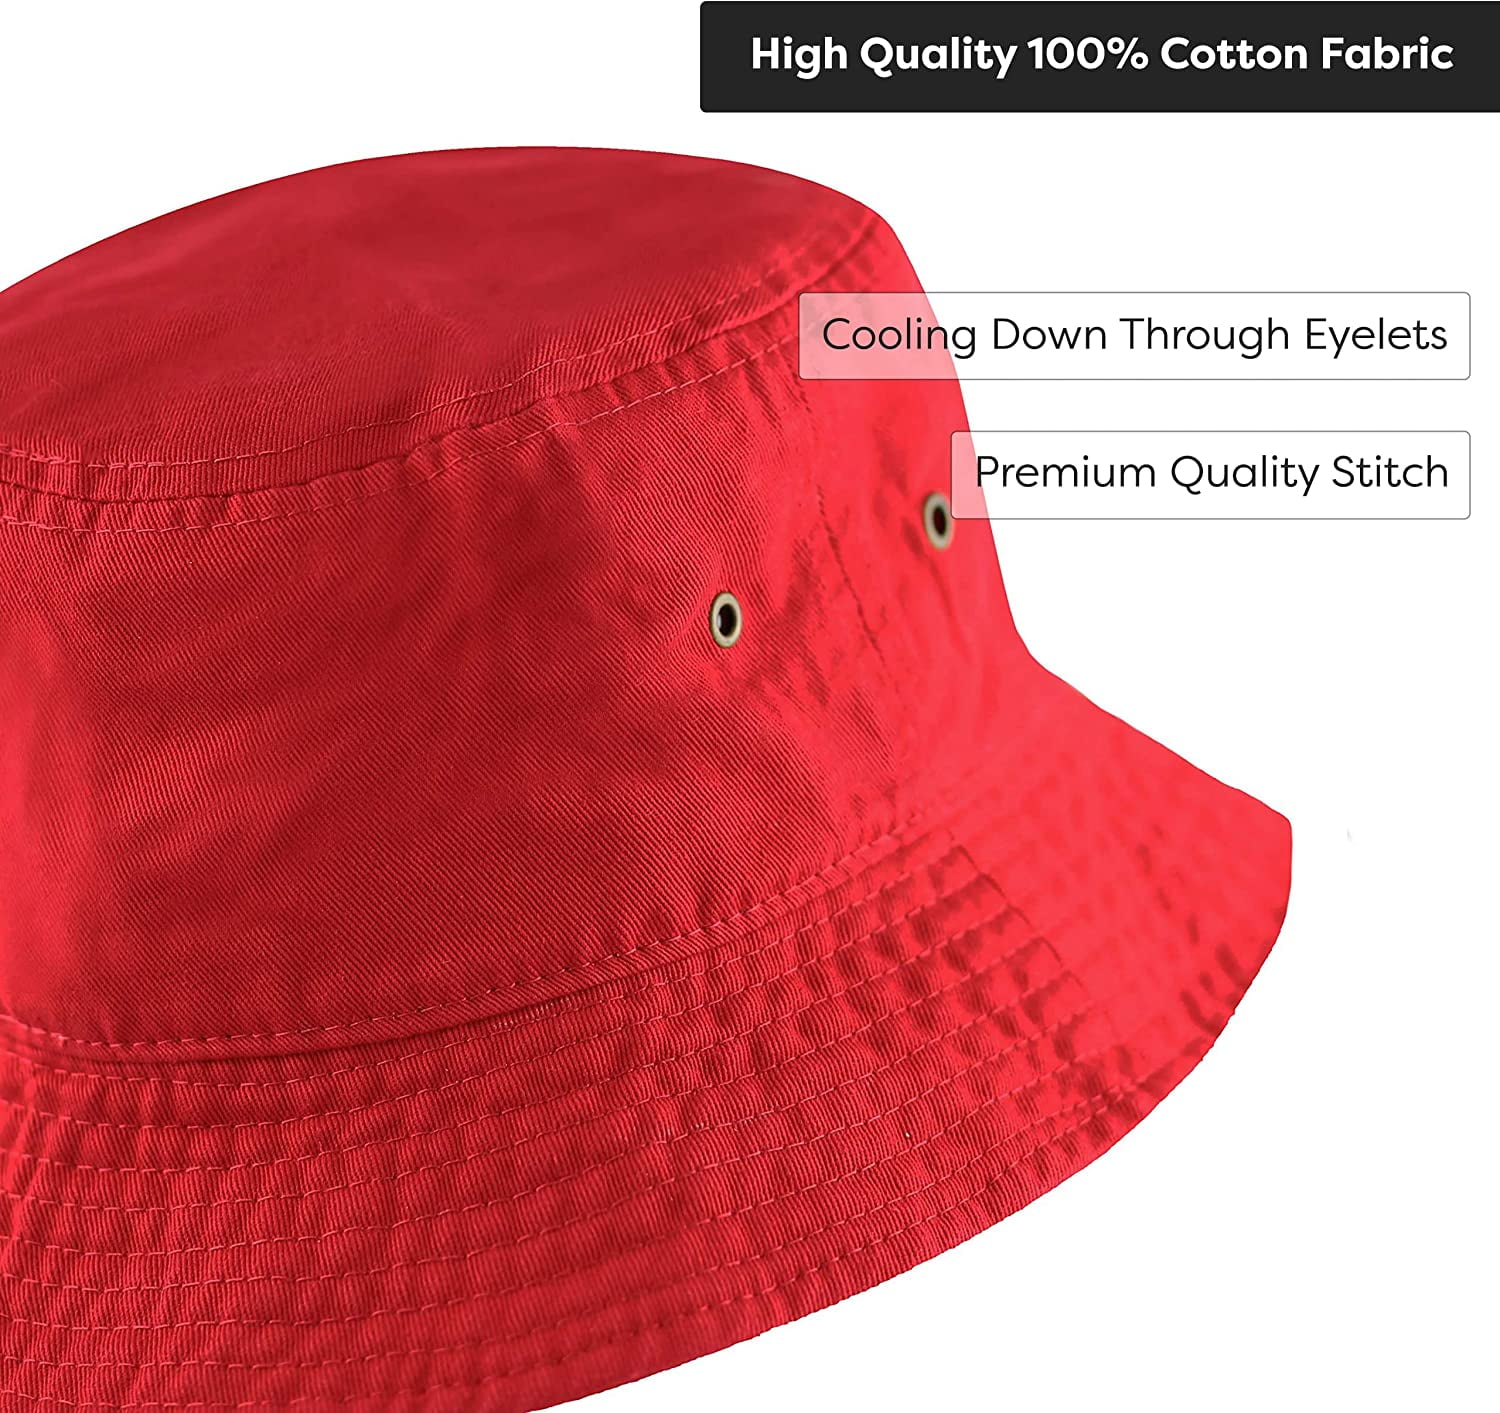 1pc Round Top Denim Bucket Hat Spring Summer Fashion Solid Color Foldable  Basin Hat Womens Hat, 90 Days Buyer Protection